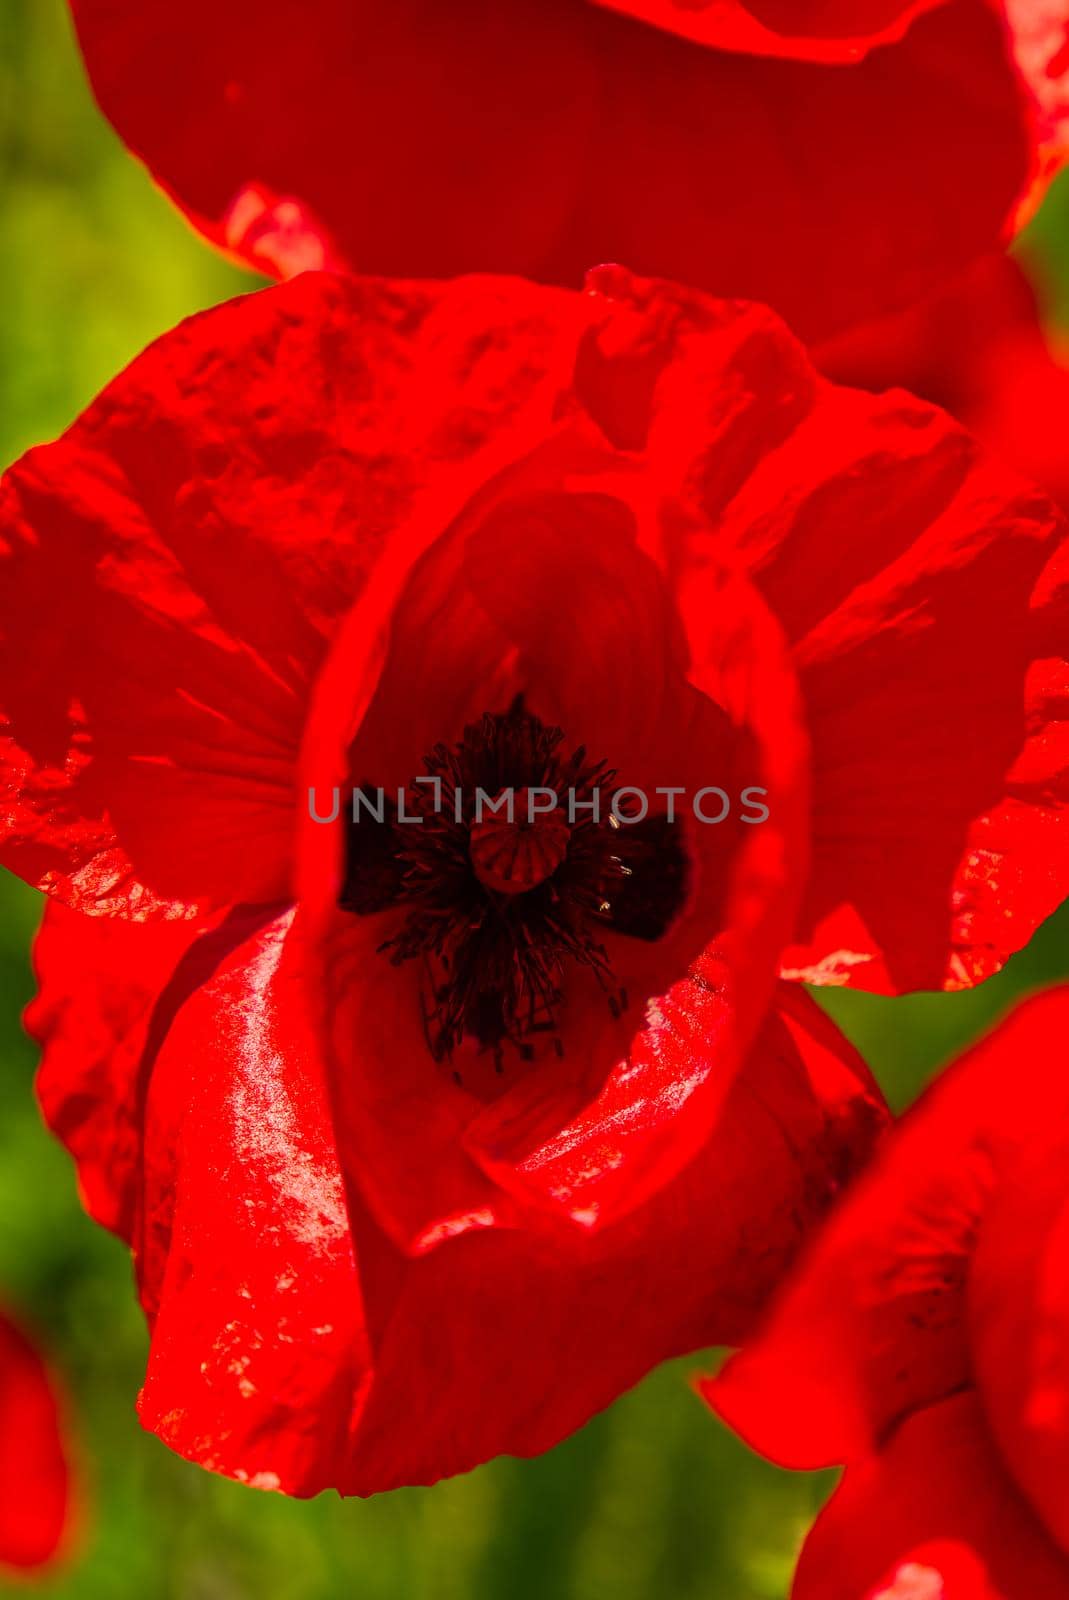 Field of red poppies. Red poppy on green weeds field. Close up poppy head. Papaver rhoeas. Beautiful wild field of red poppies. Summer time, beauty in nature concept